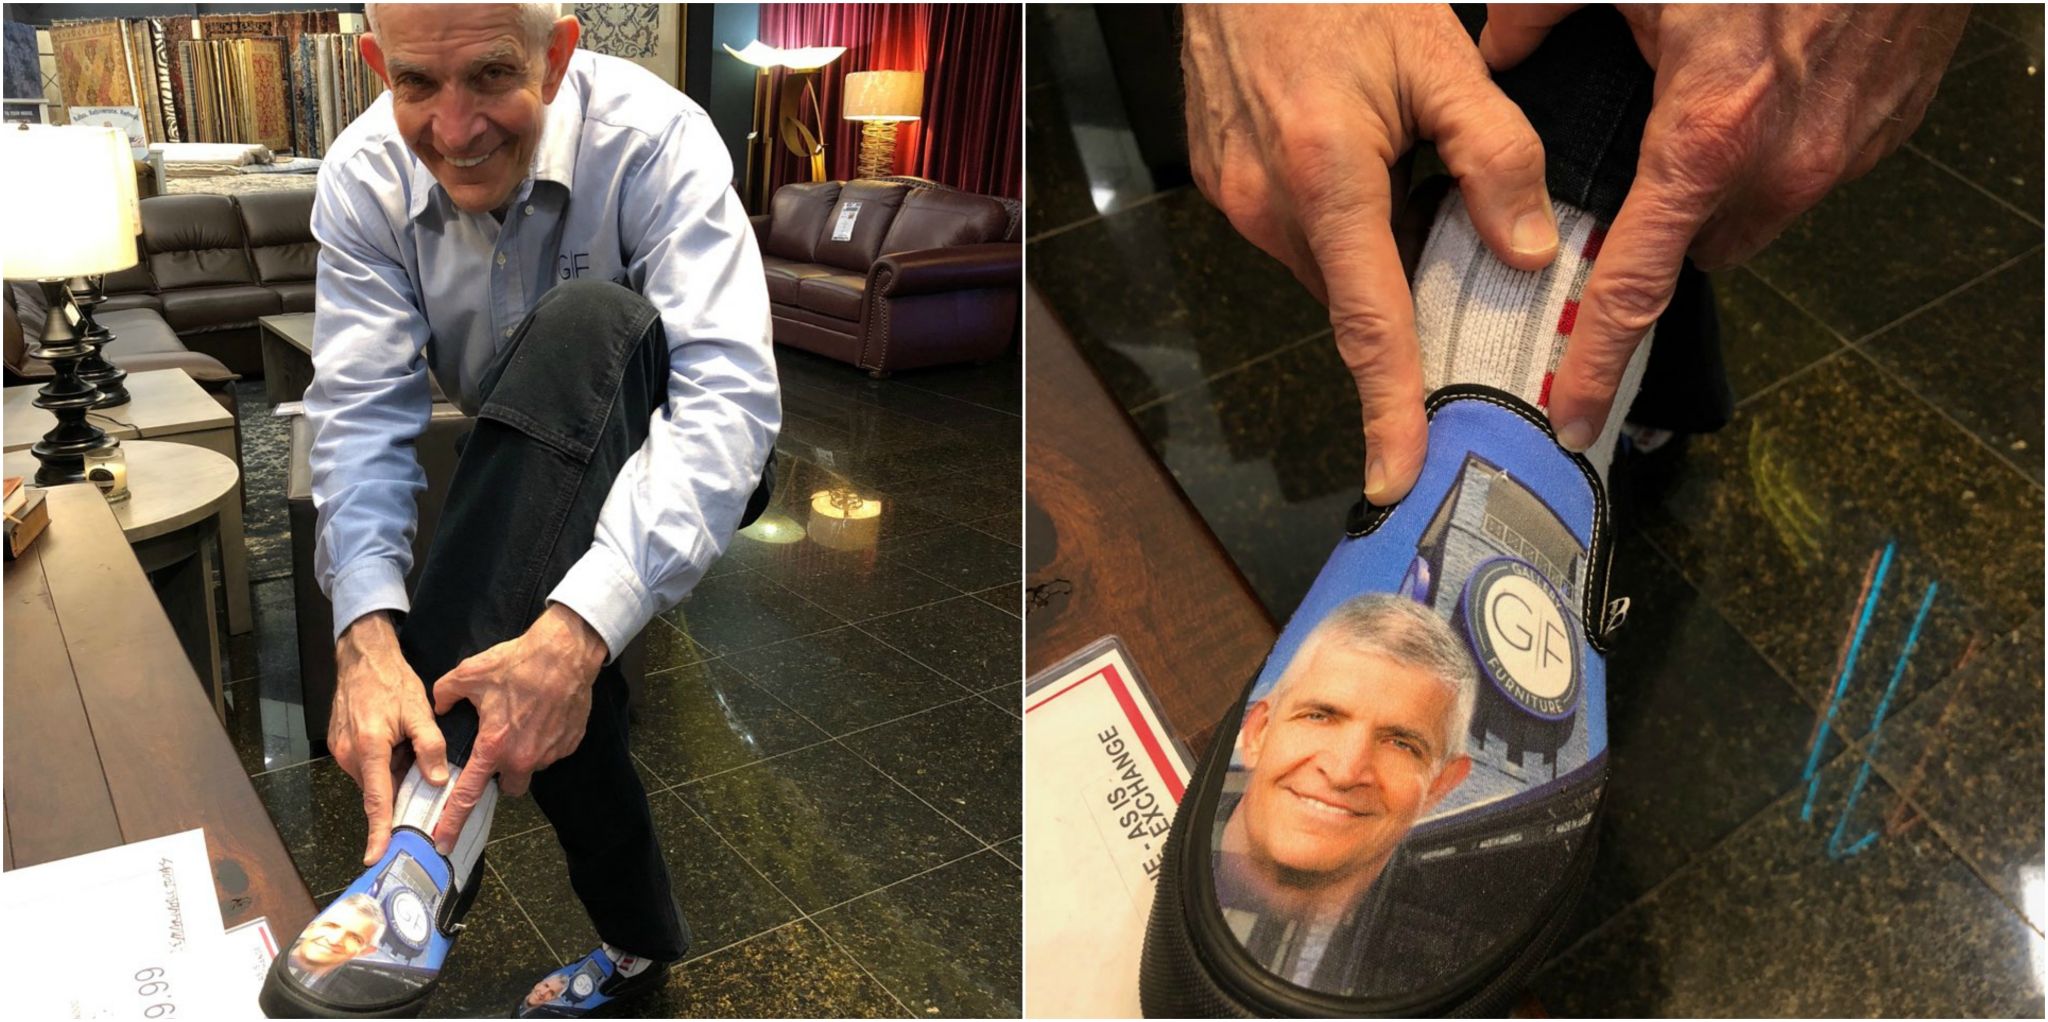 Mattress Mack gets his own pair of 